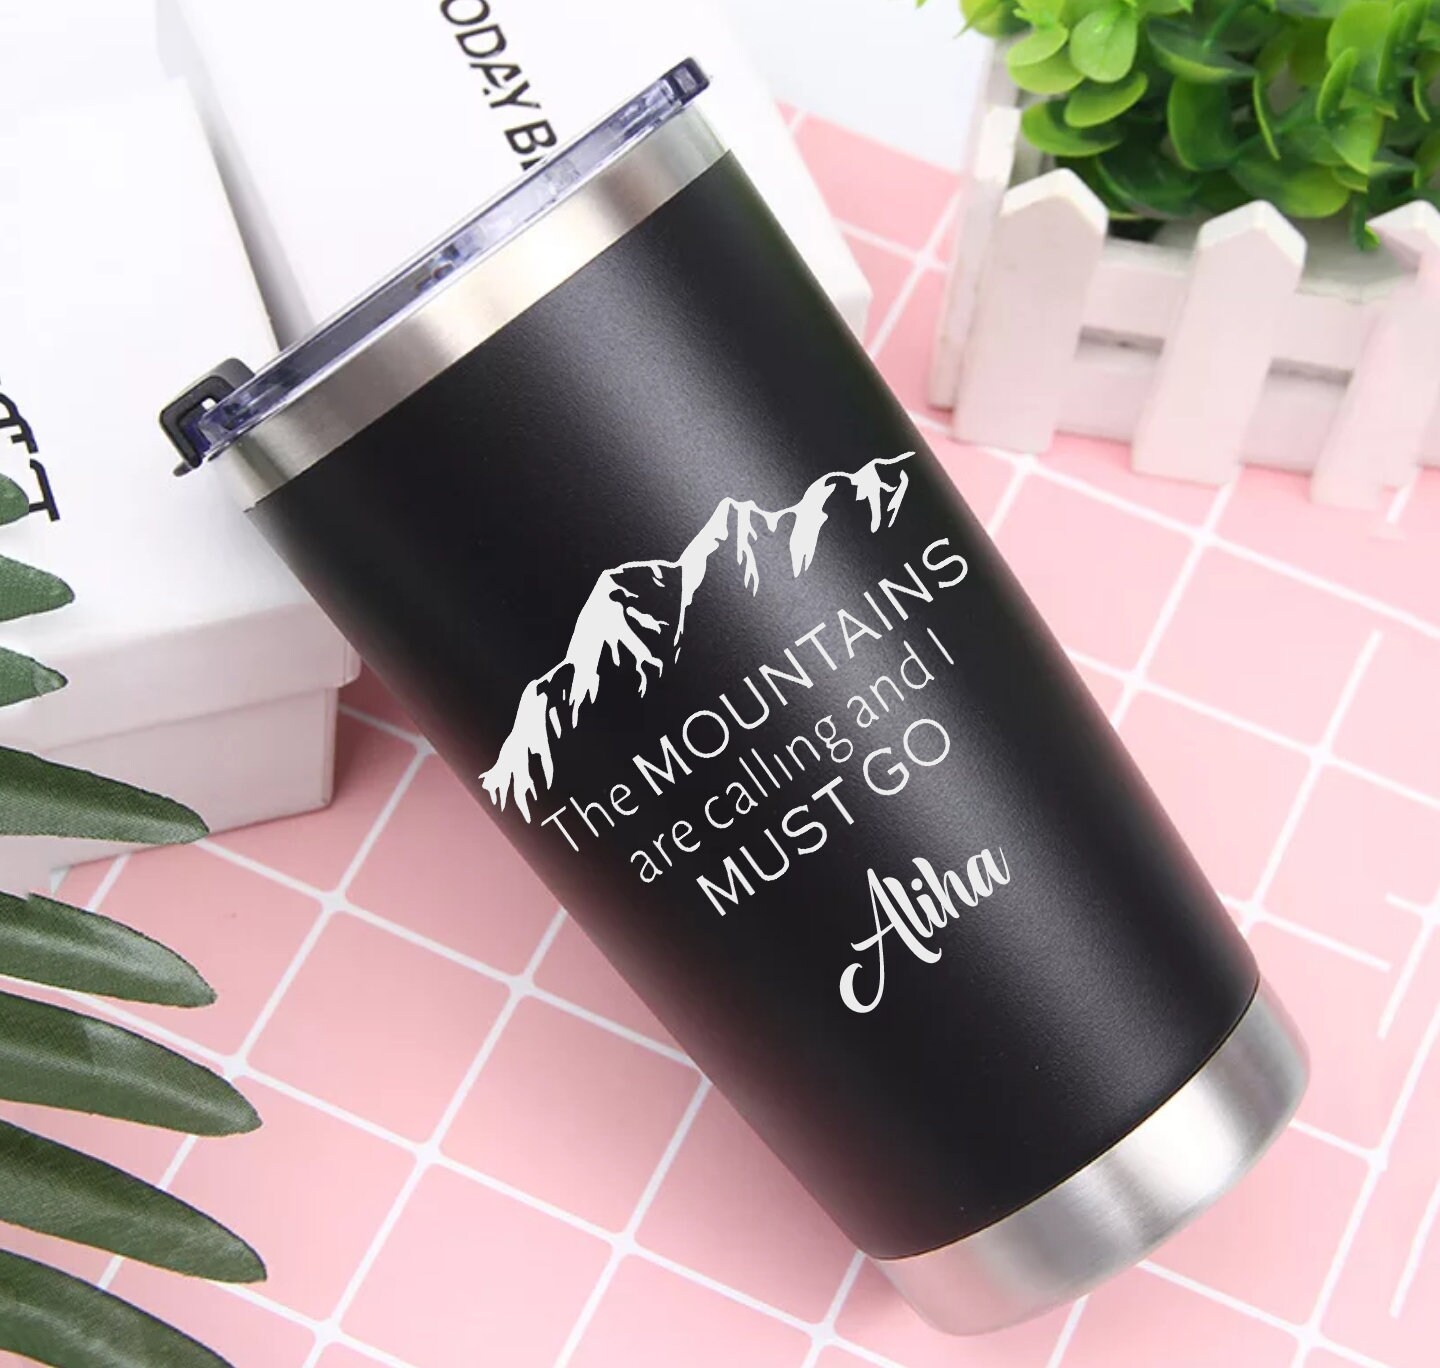 The Mountains Are Calling And I Must Go Coffee Mug — Eatwell101